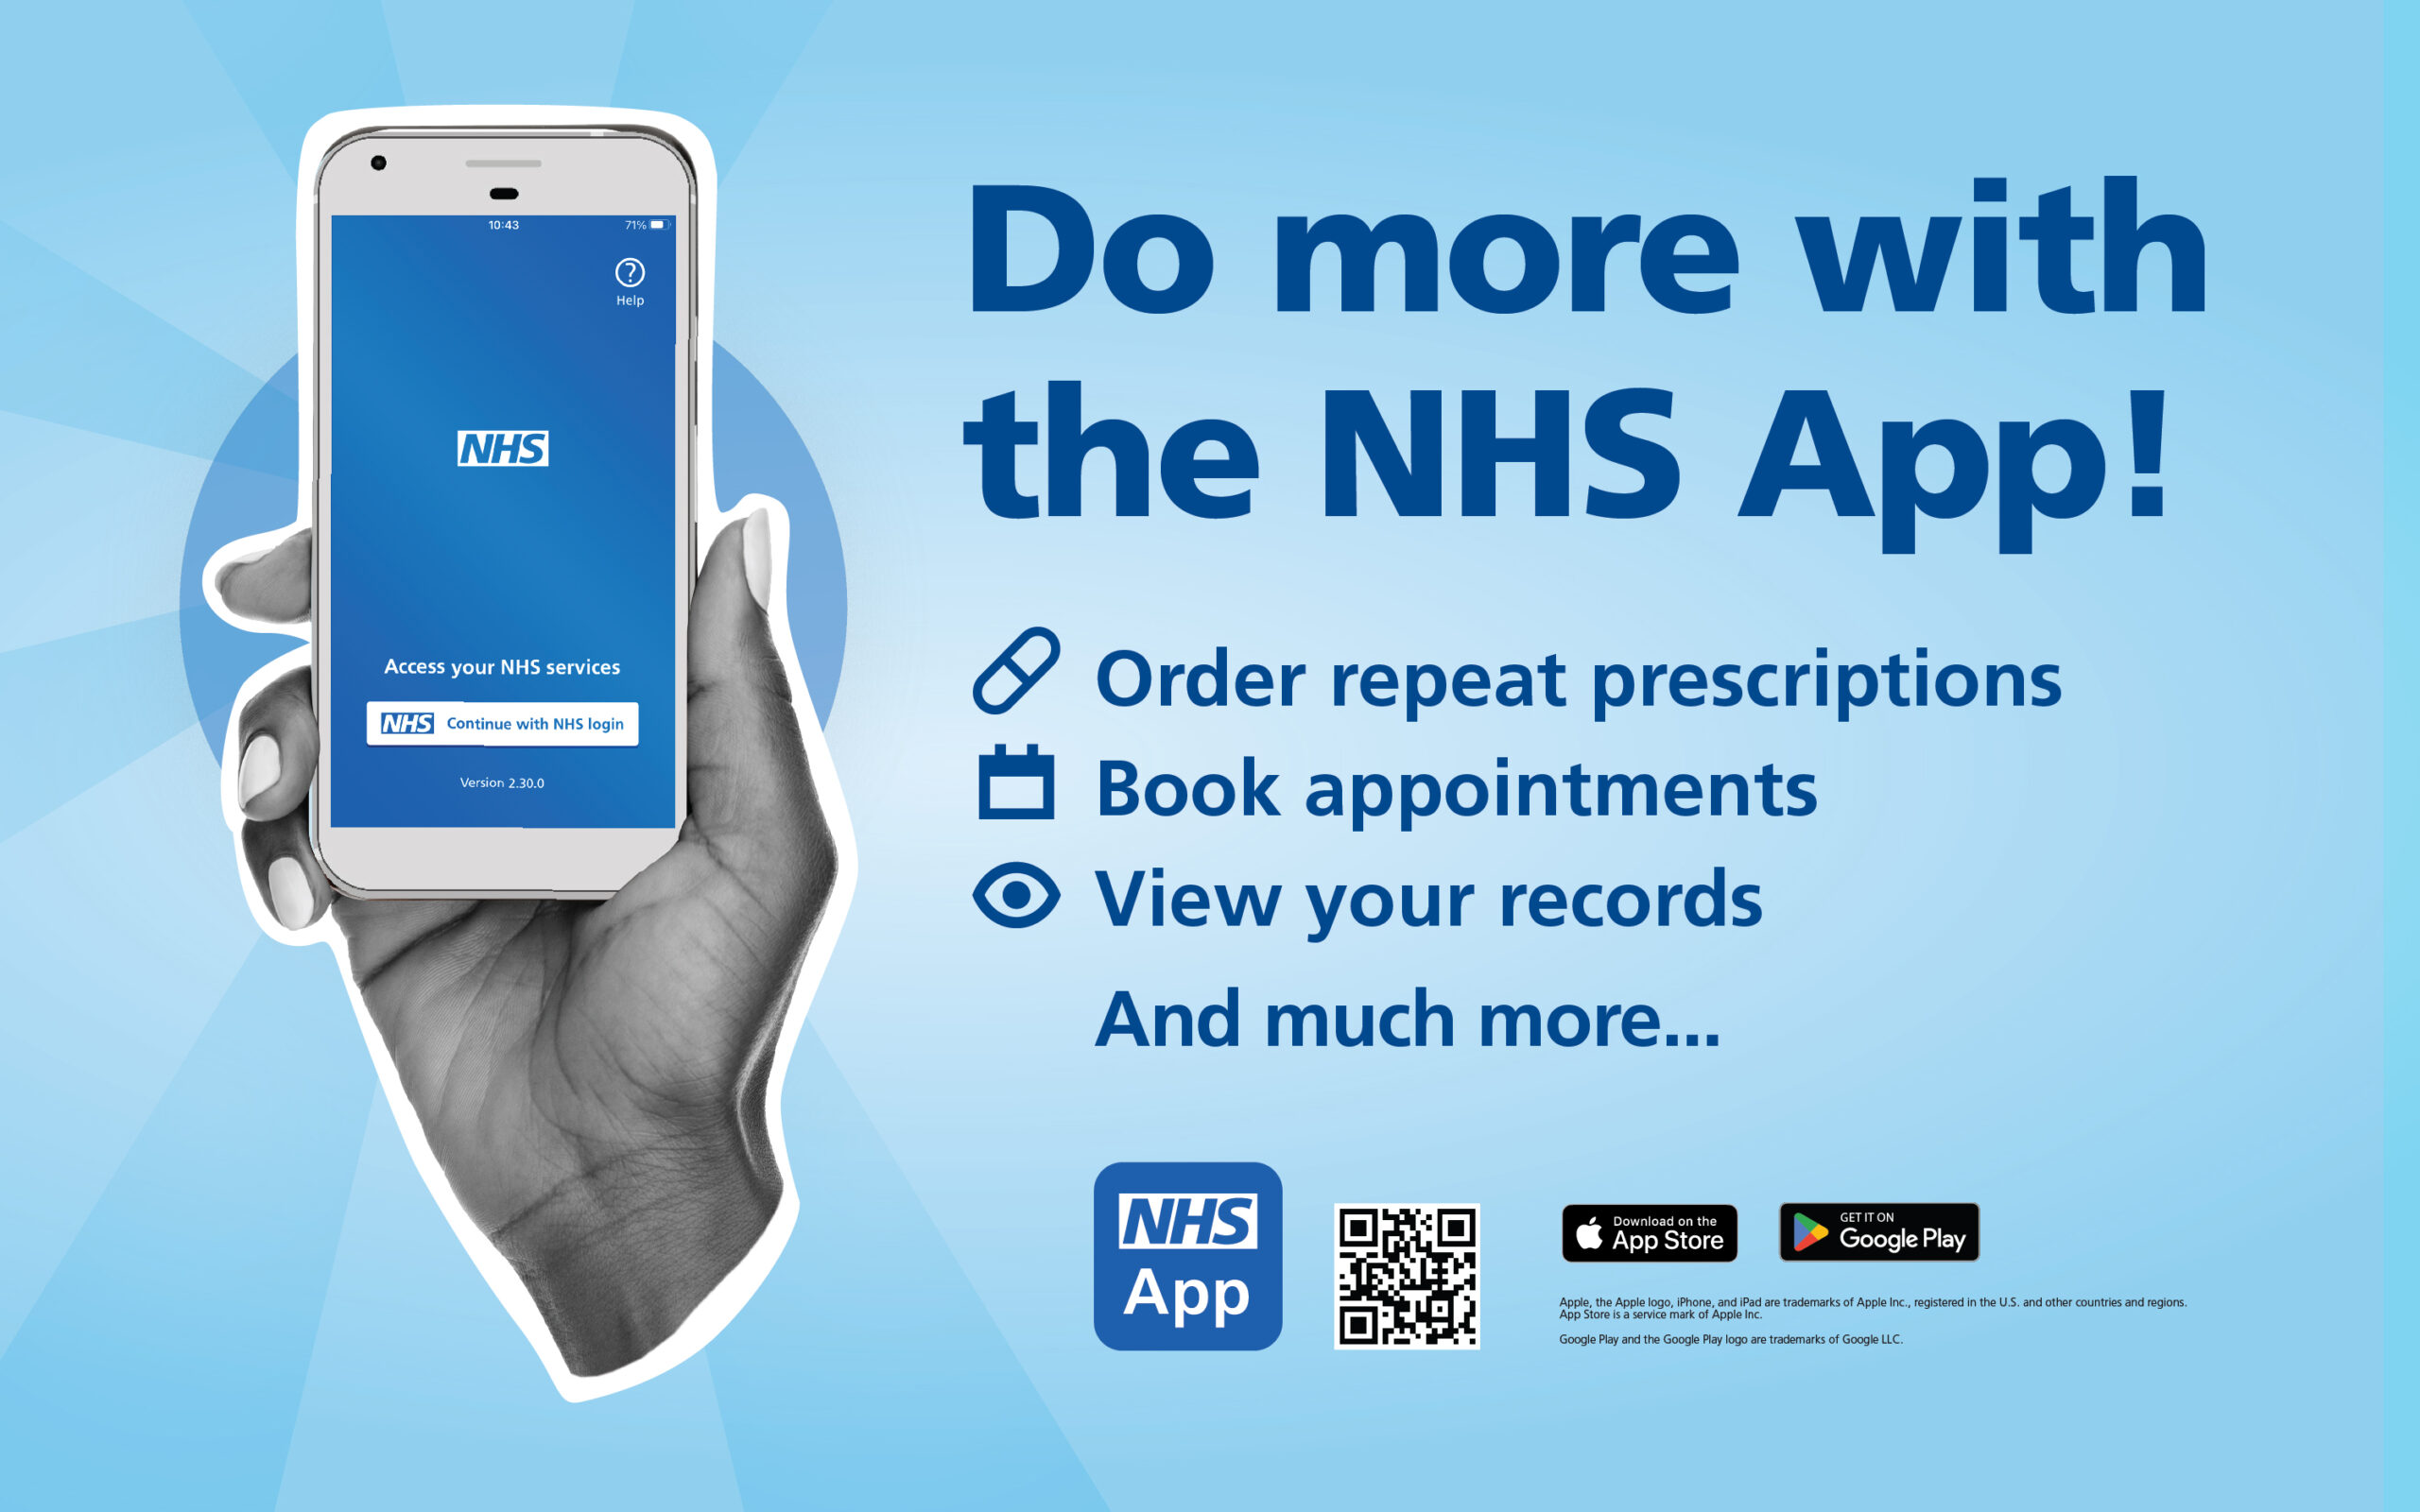 Do more with the NHS App! Order prescriptions, book appointments, view your records and much more